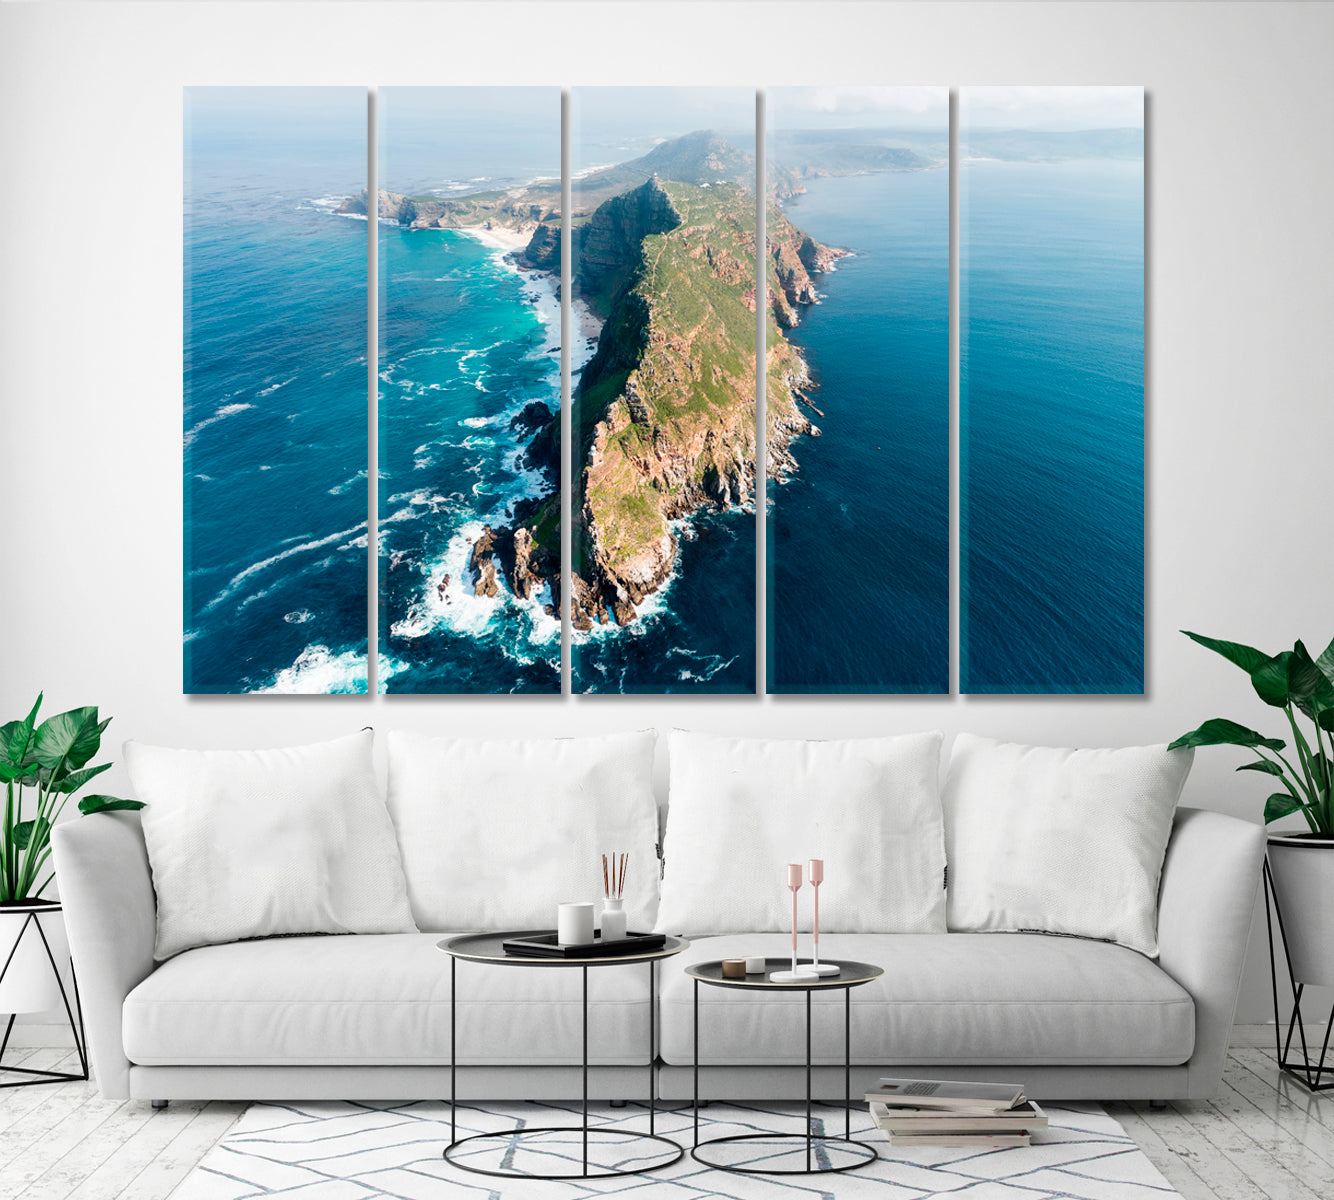 Where Two Oceans Meet in Cape Point South Africa Cities Wall Art Artesty 5 panels 36" x 24" 